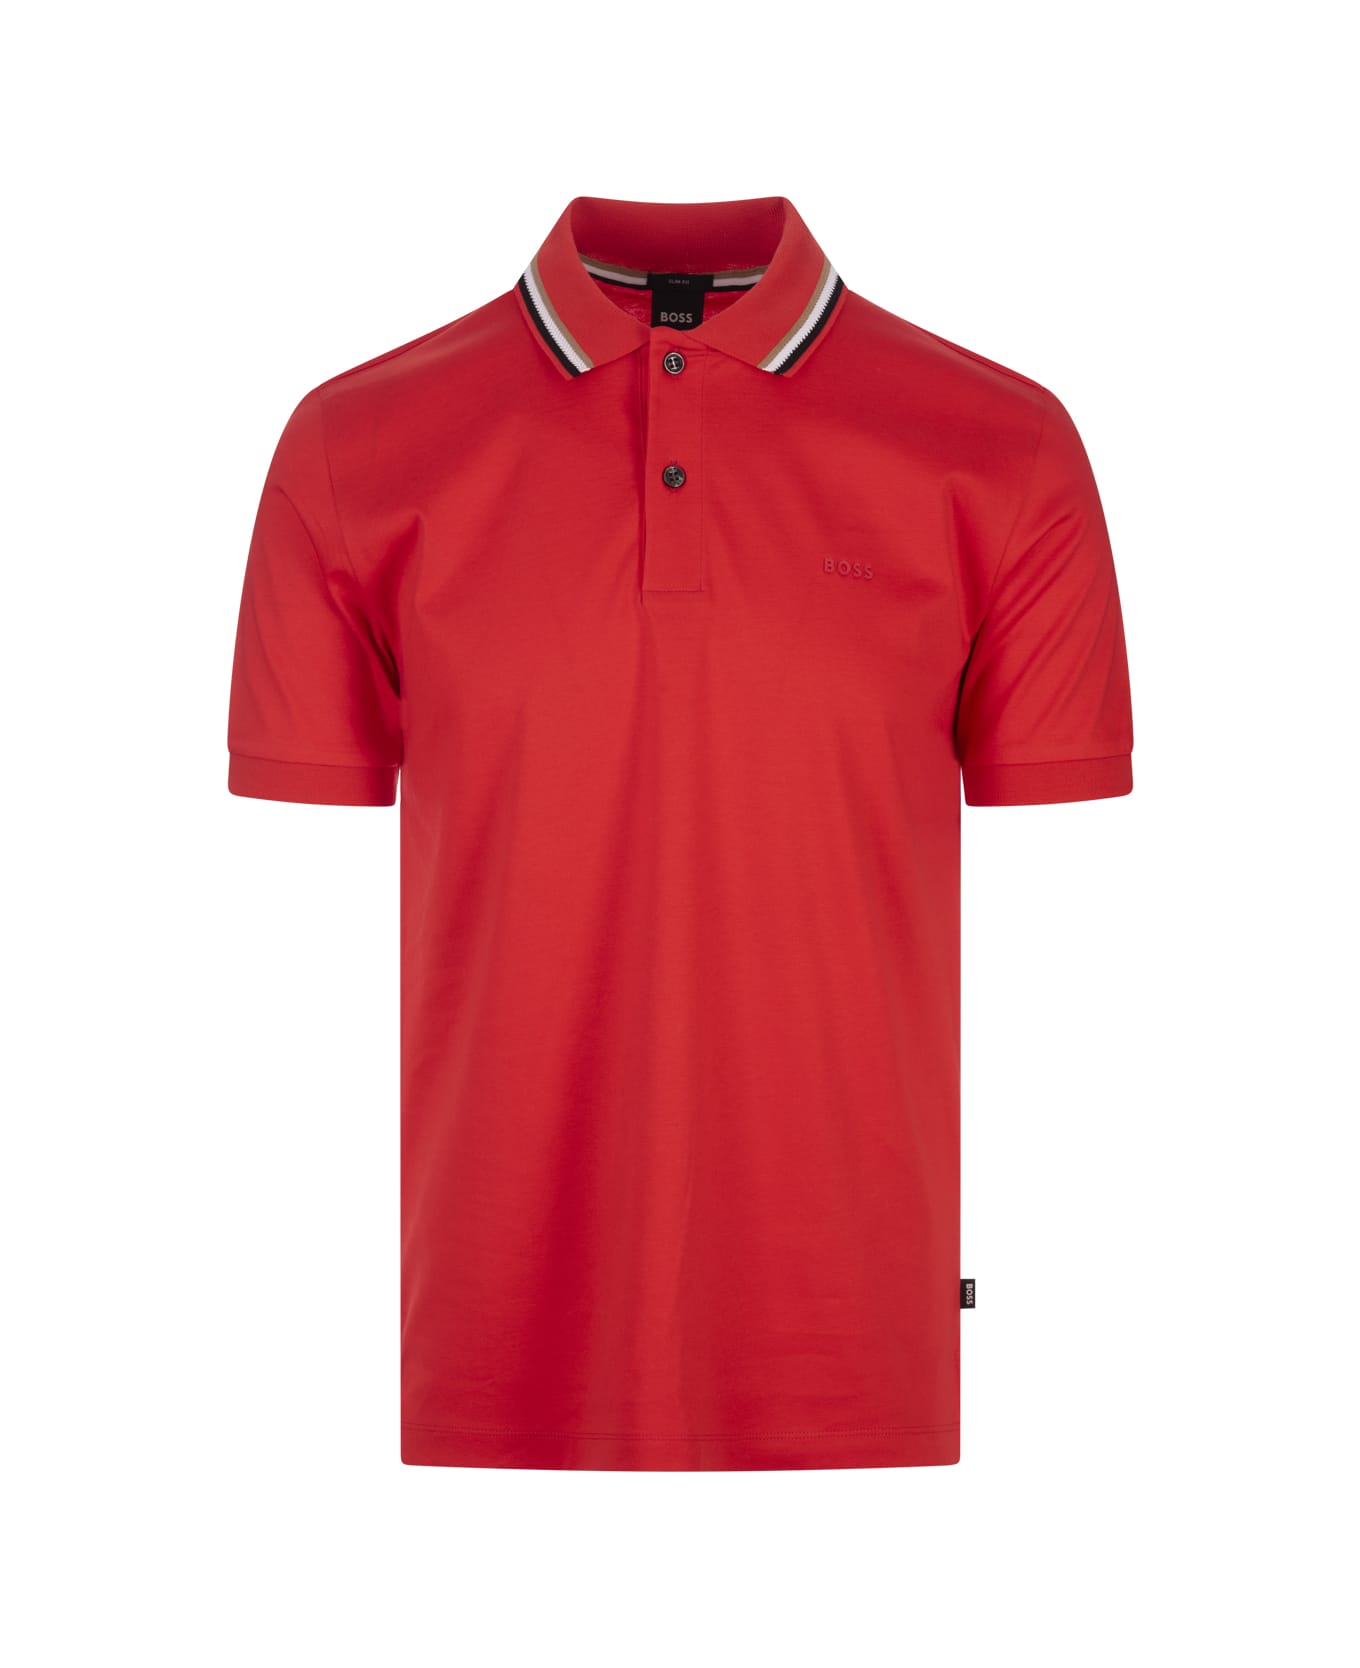 Hugo Boss Red Slim Fit Polo Shirt With Striped Collar - Red